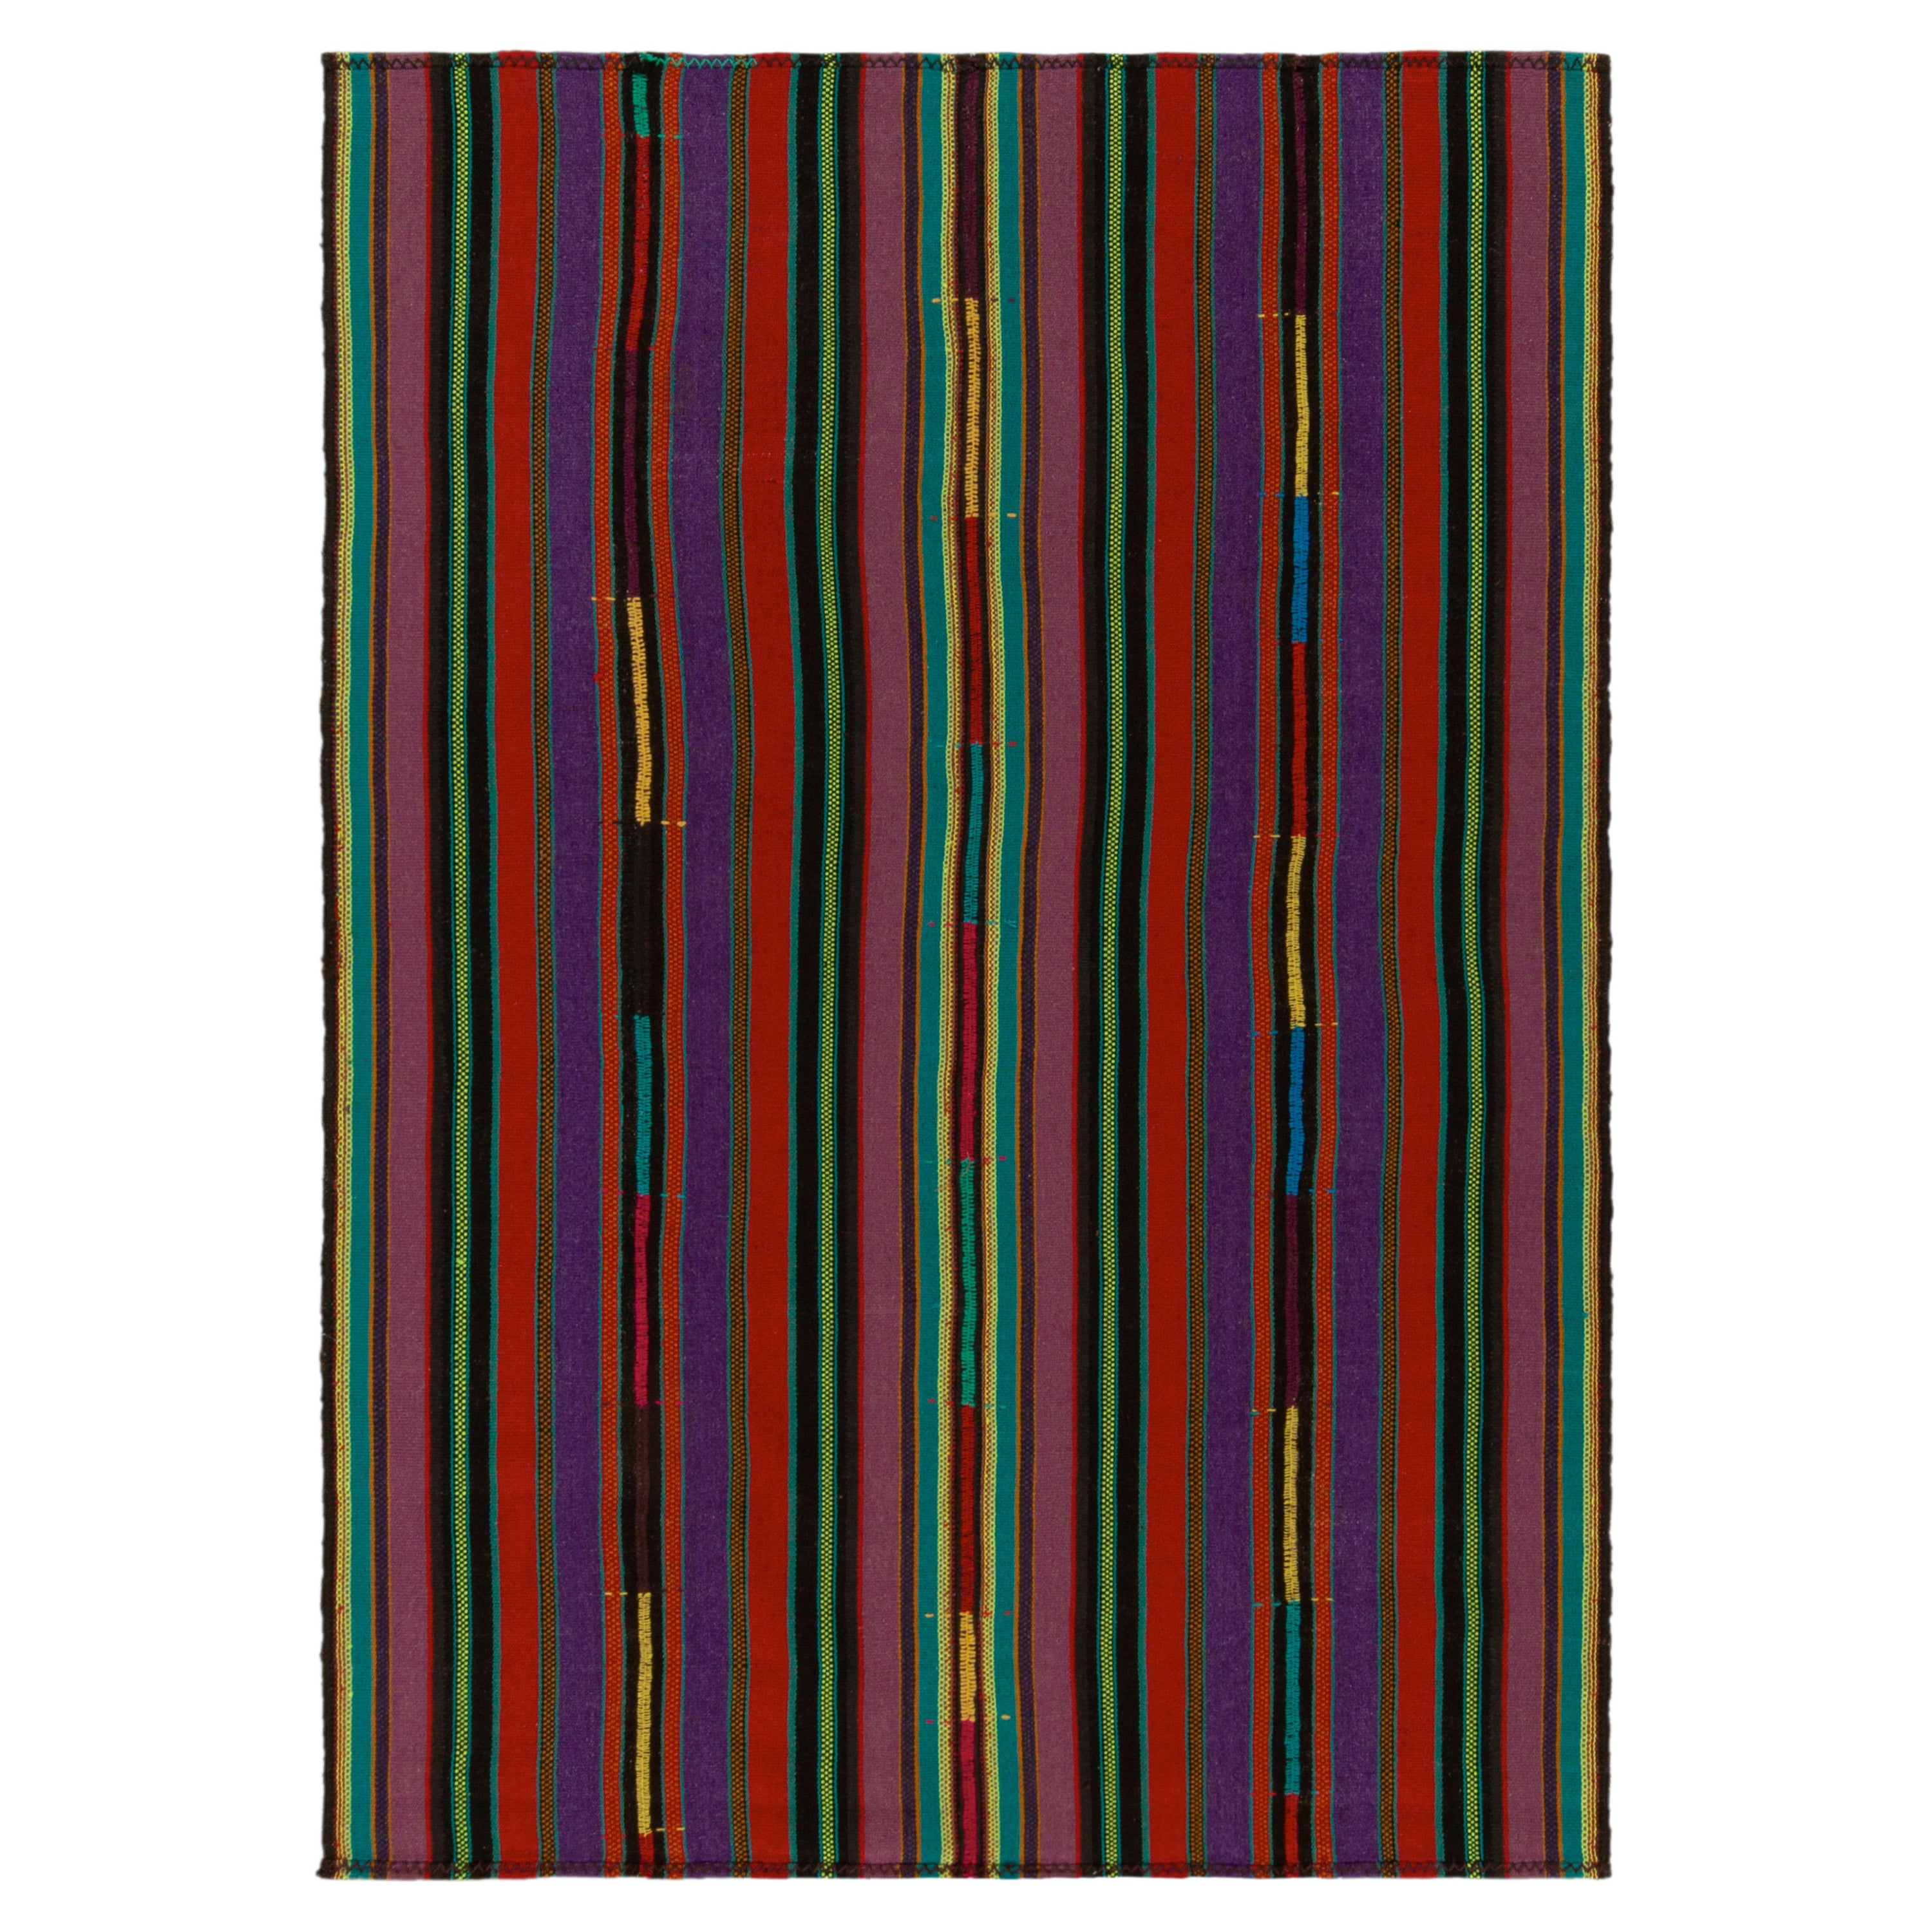 1950s Vintage Kilim Style in Red, Purple, Green Stripe Patterns by Rug & Kilim For Sale